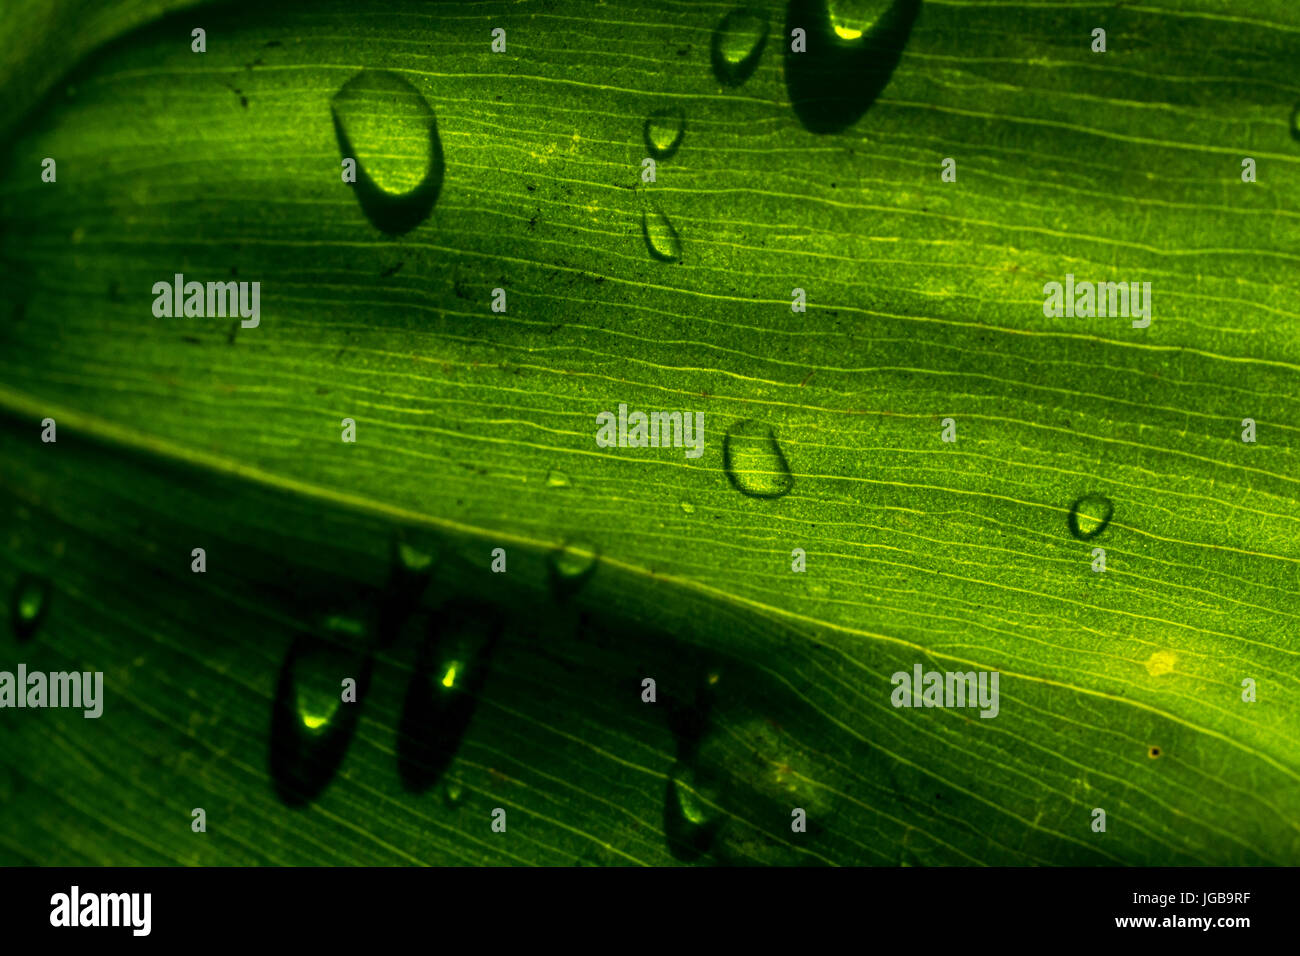 Deep green color plant leaf texture closeup, with small rain water droplets, backlit. Stock Photo